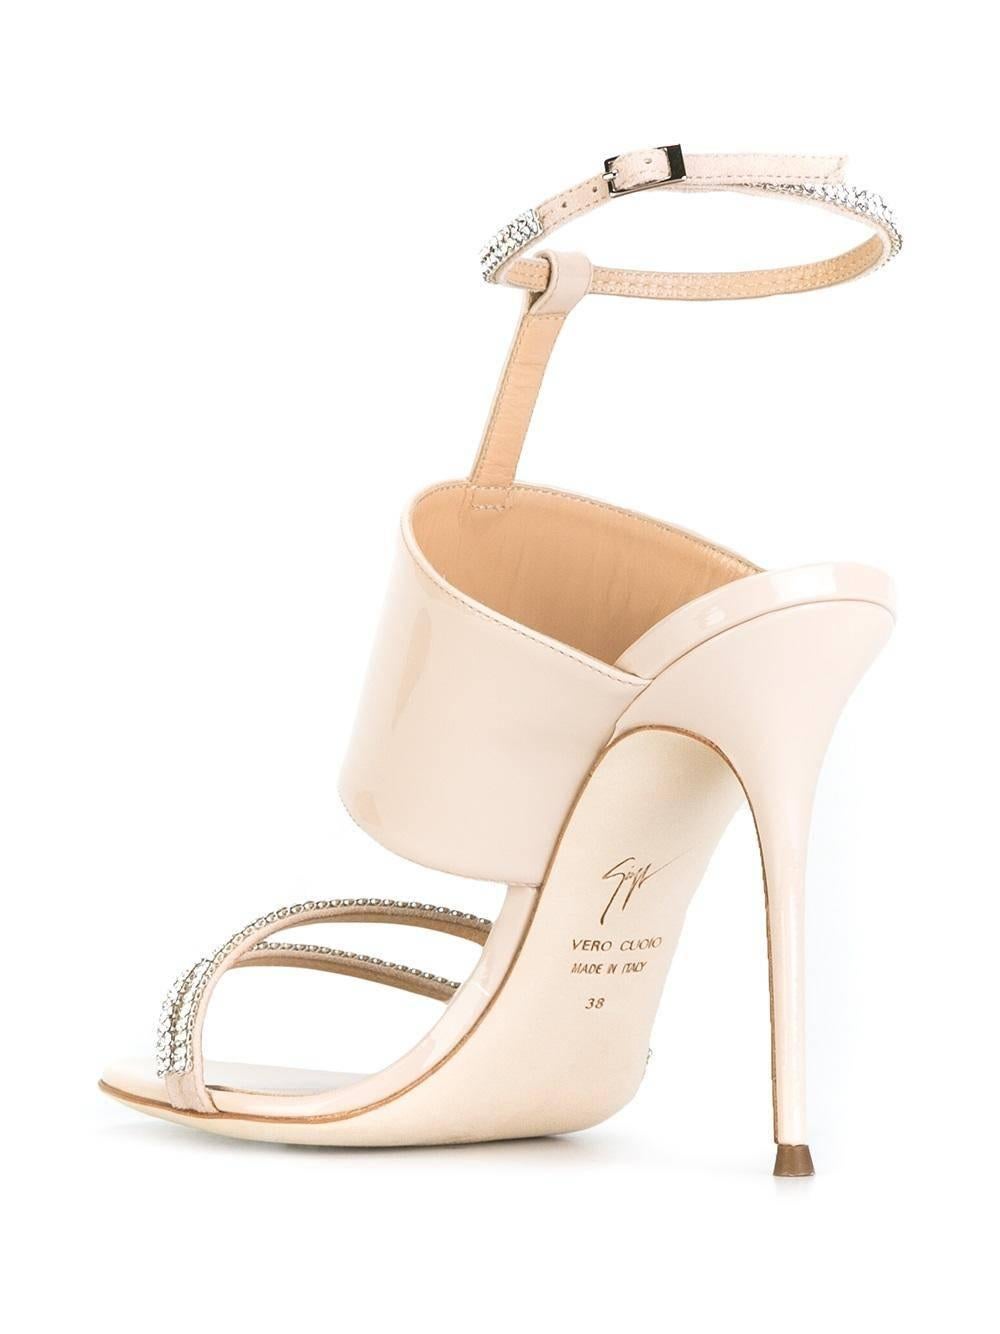 Women's Giuseppe Zanotti New Nude Patent Leather Crystal Evening Sandals Heels in Box